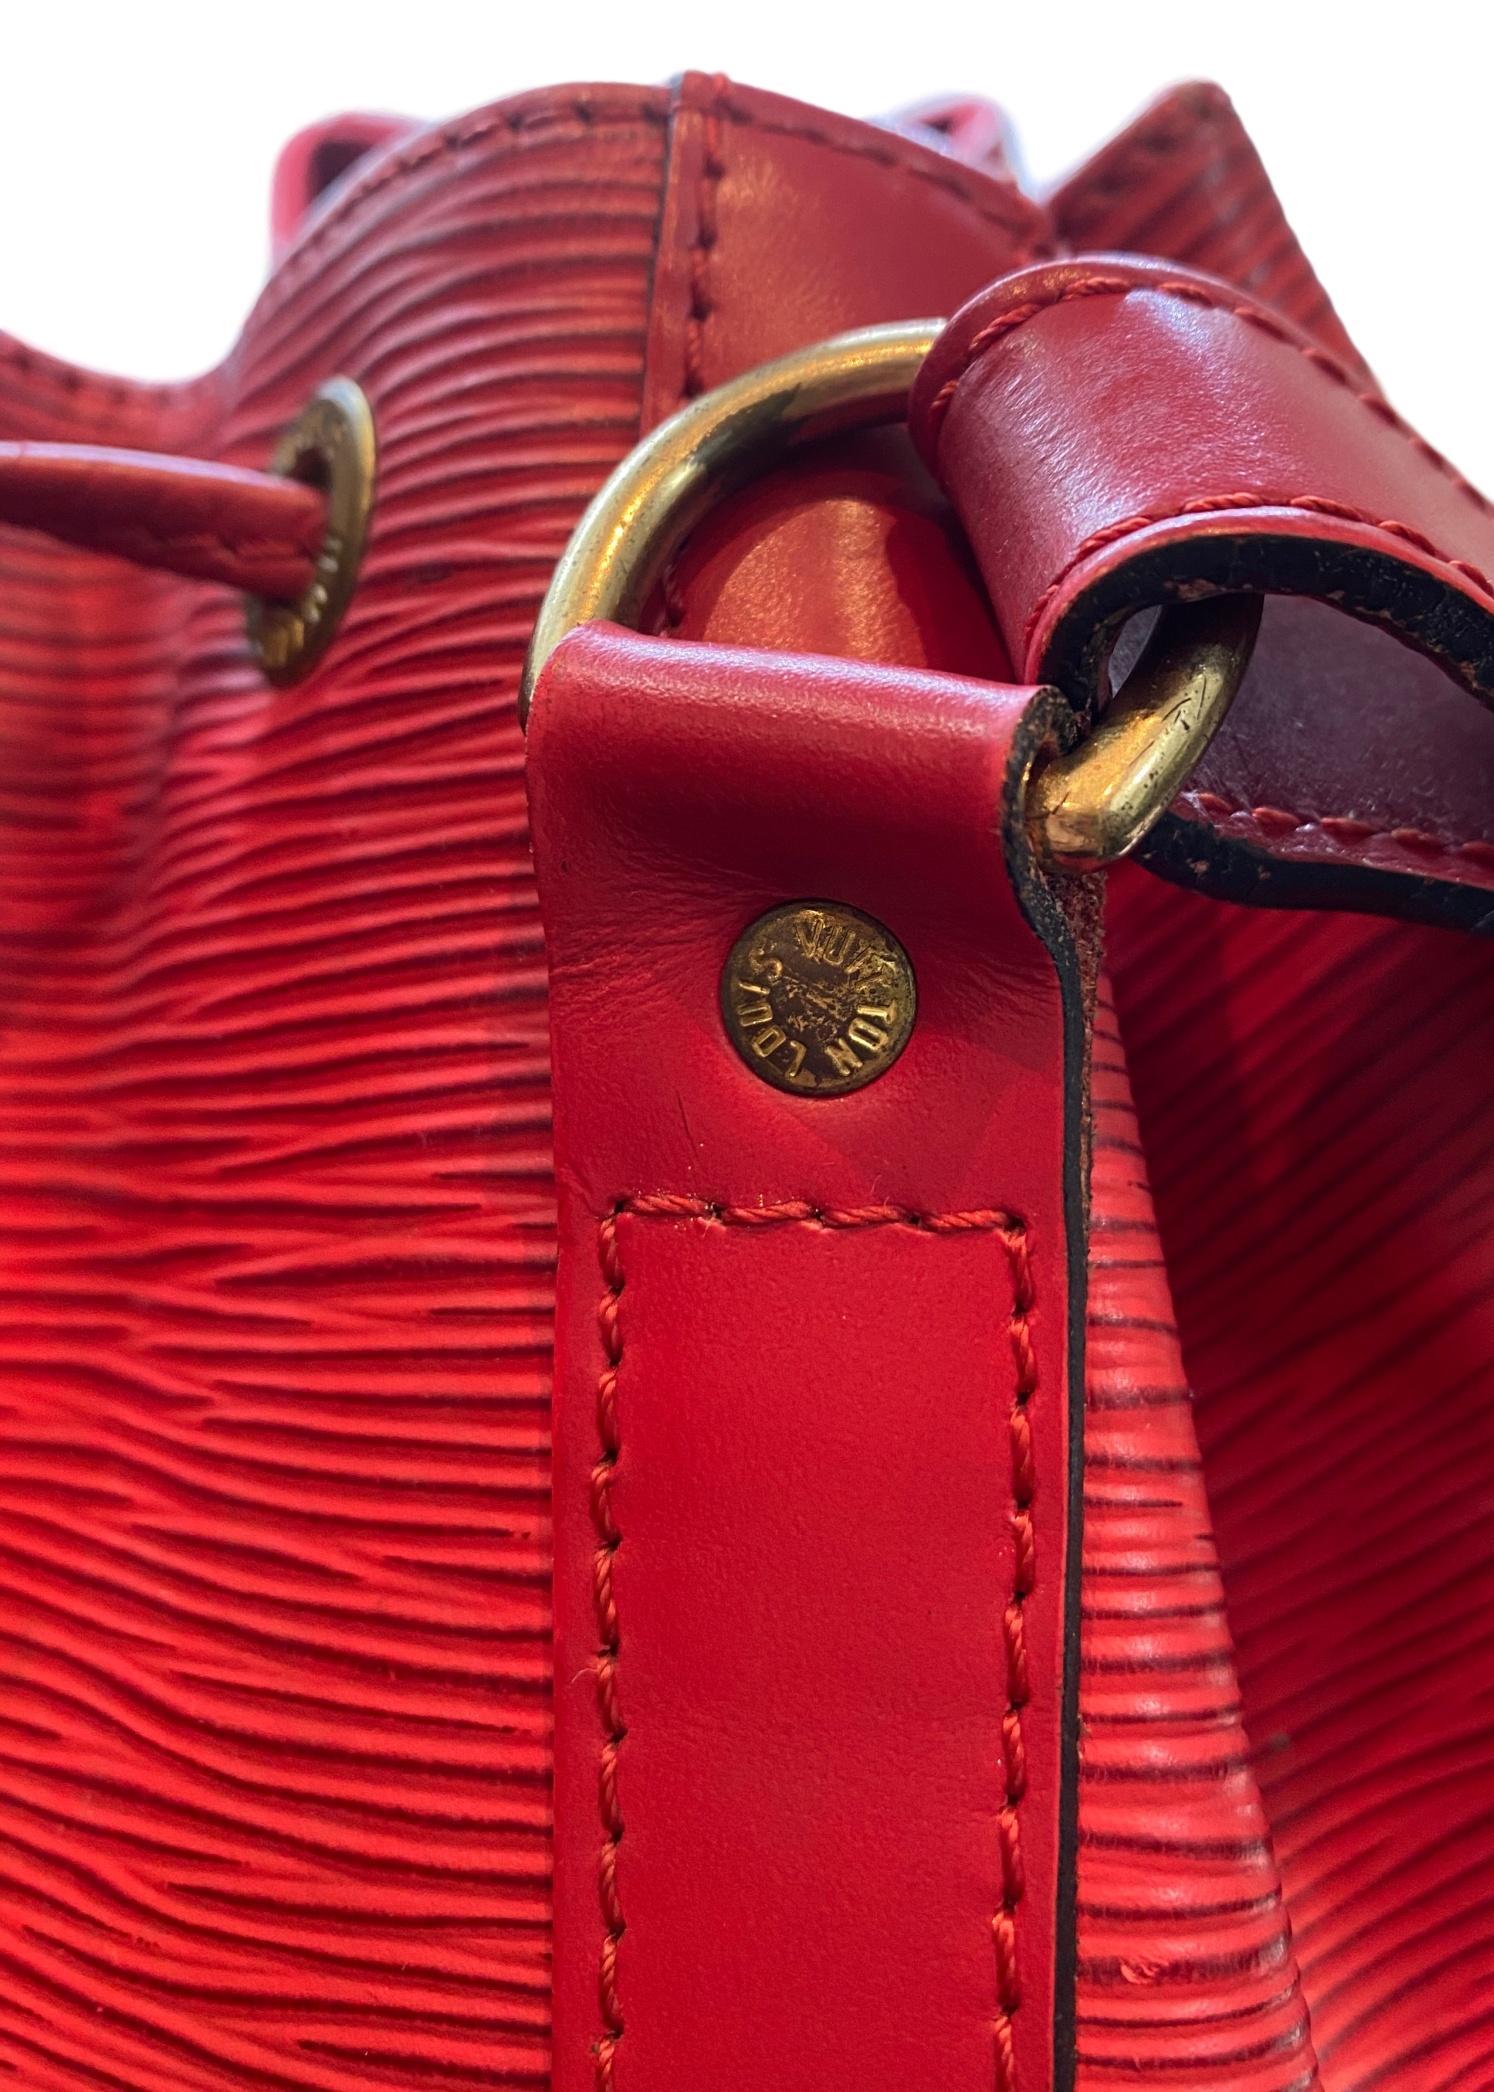 Louis Vuitton Noe PM Bucket Bag in Red EPI Leather, France 1994. 3